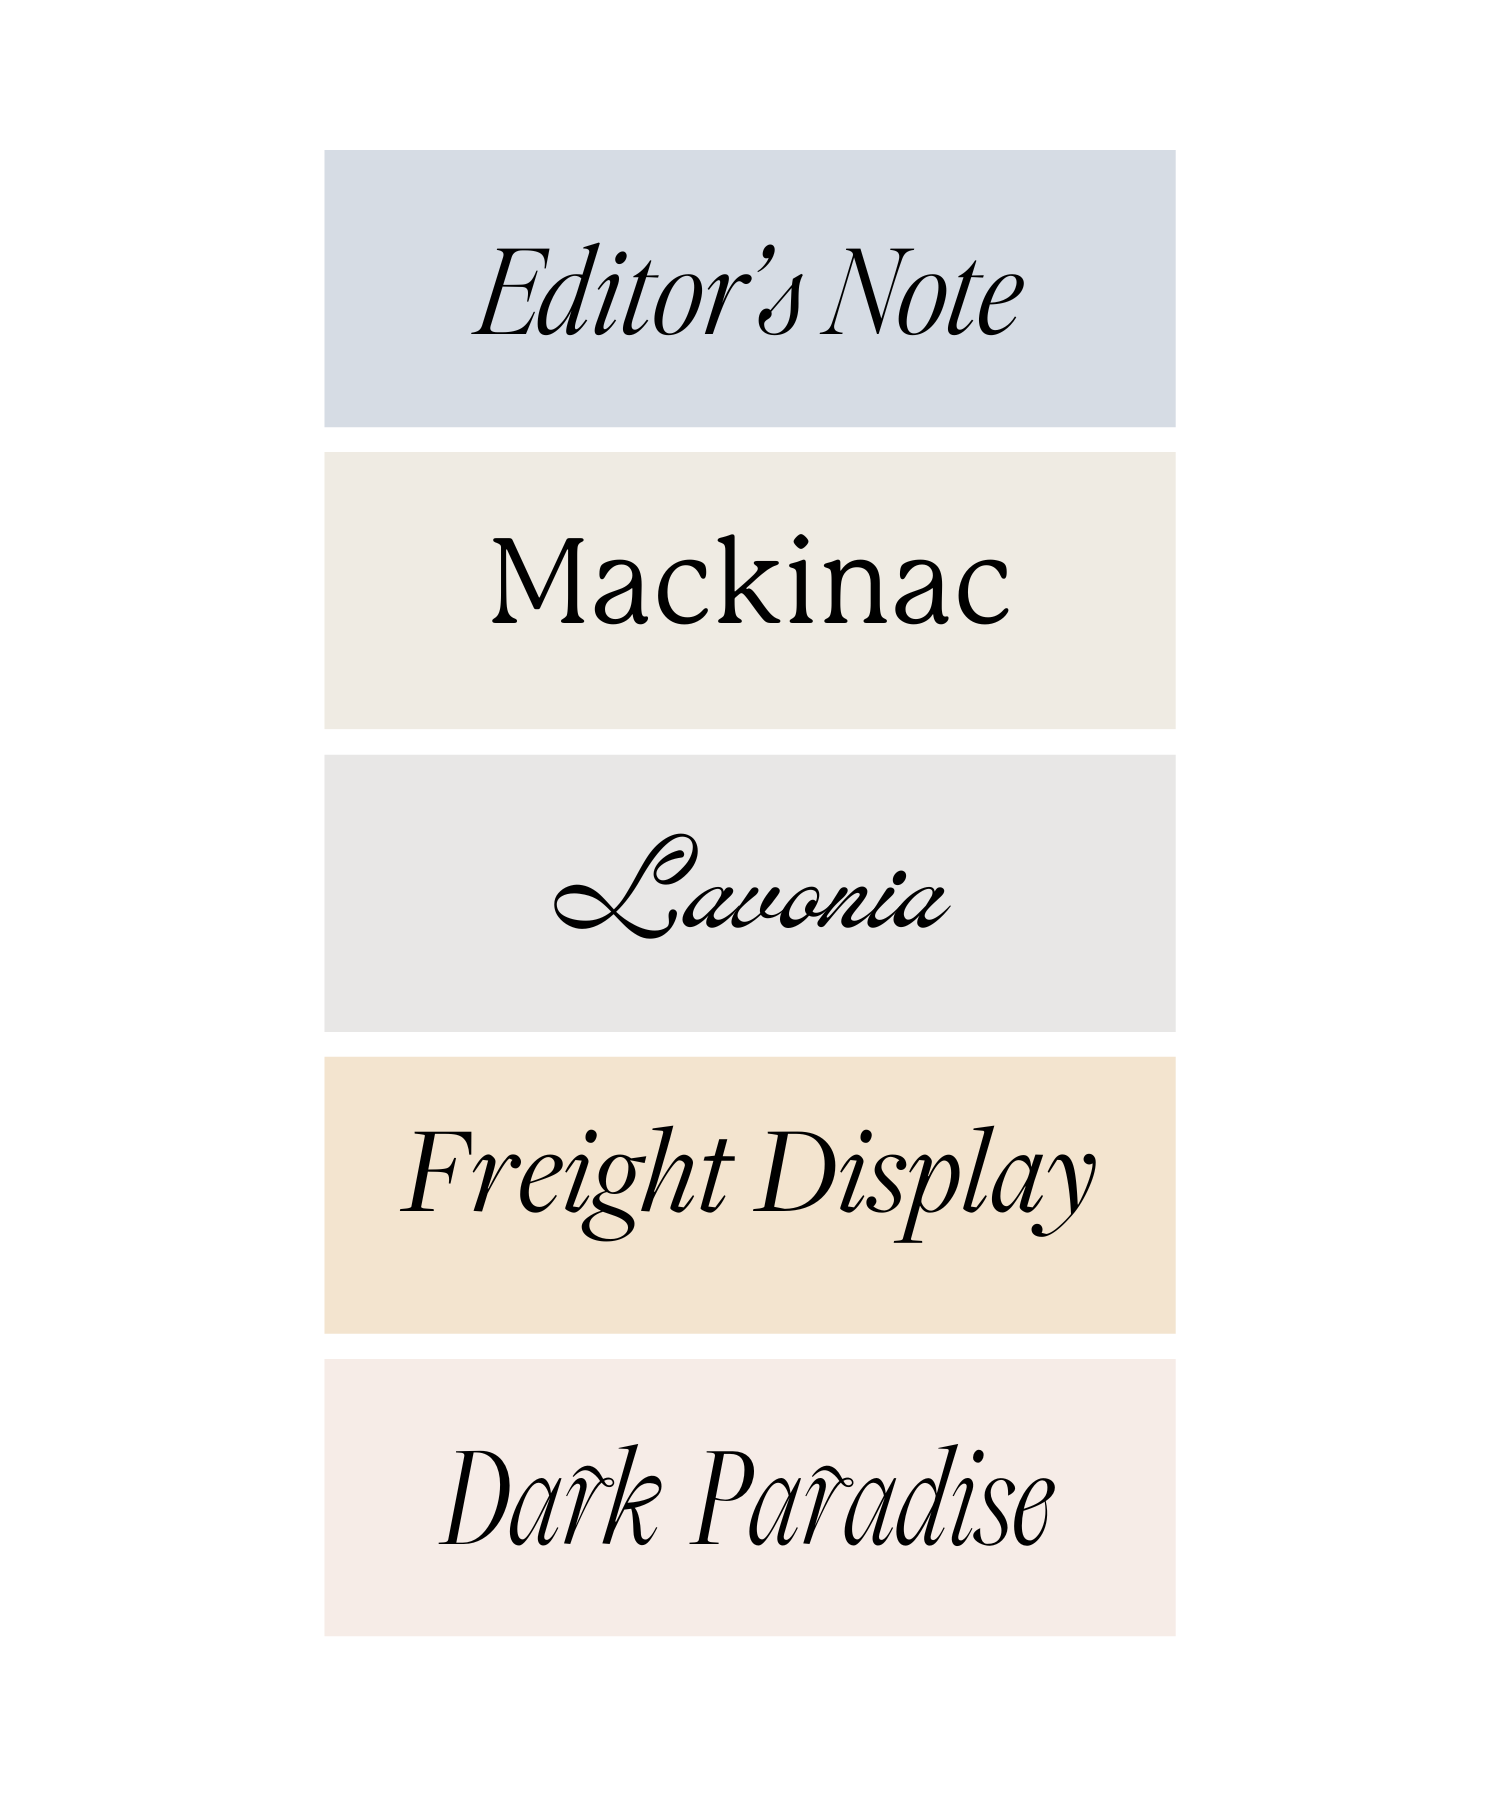 Preview of 5 fonts: Editor's Note (italic serif), Mackinac (soft serif), Lavonia (script), Freight Display (italic serif), and Dark Paradise (script serif)